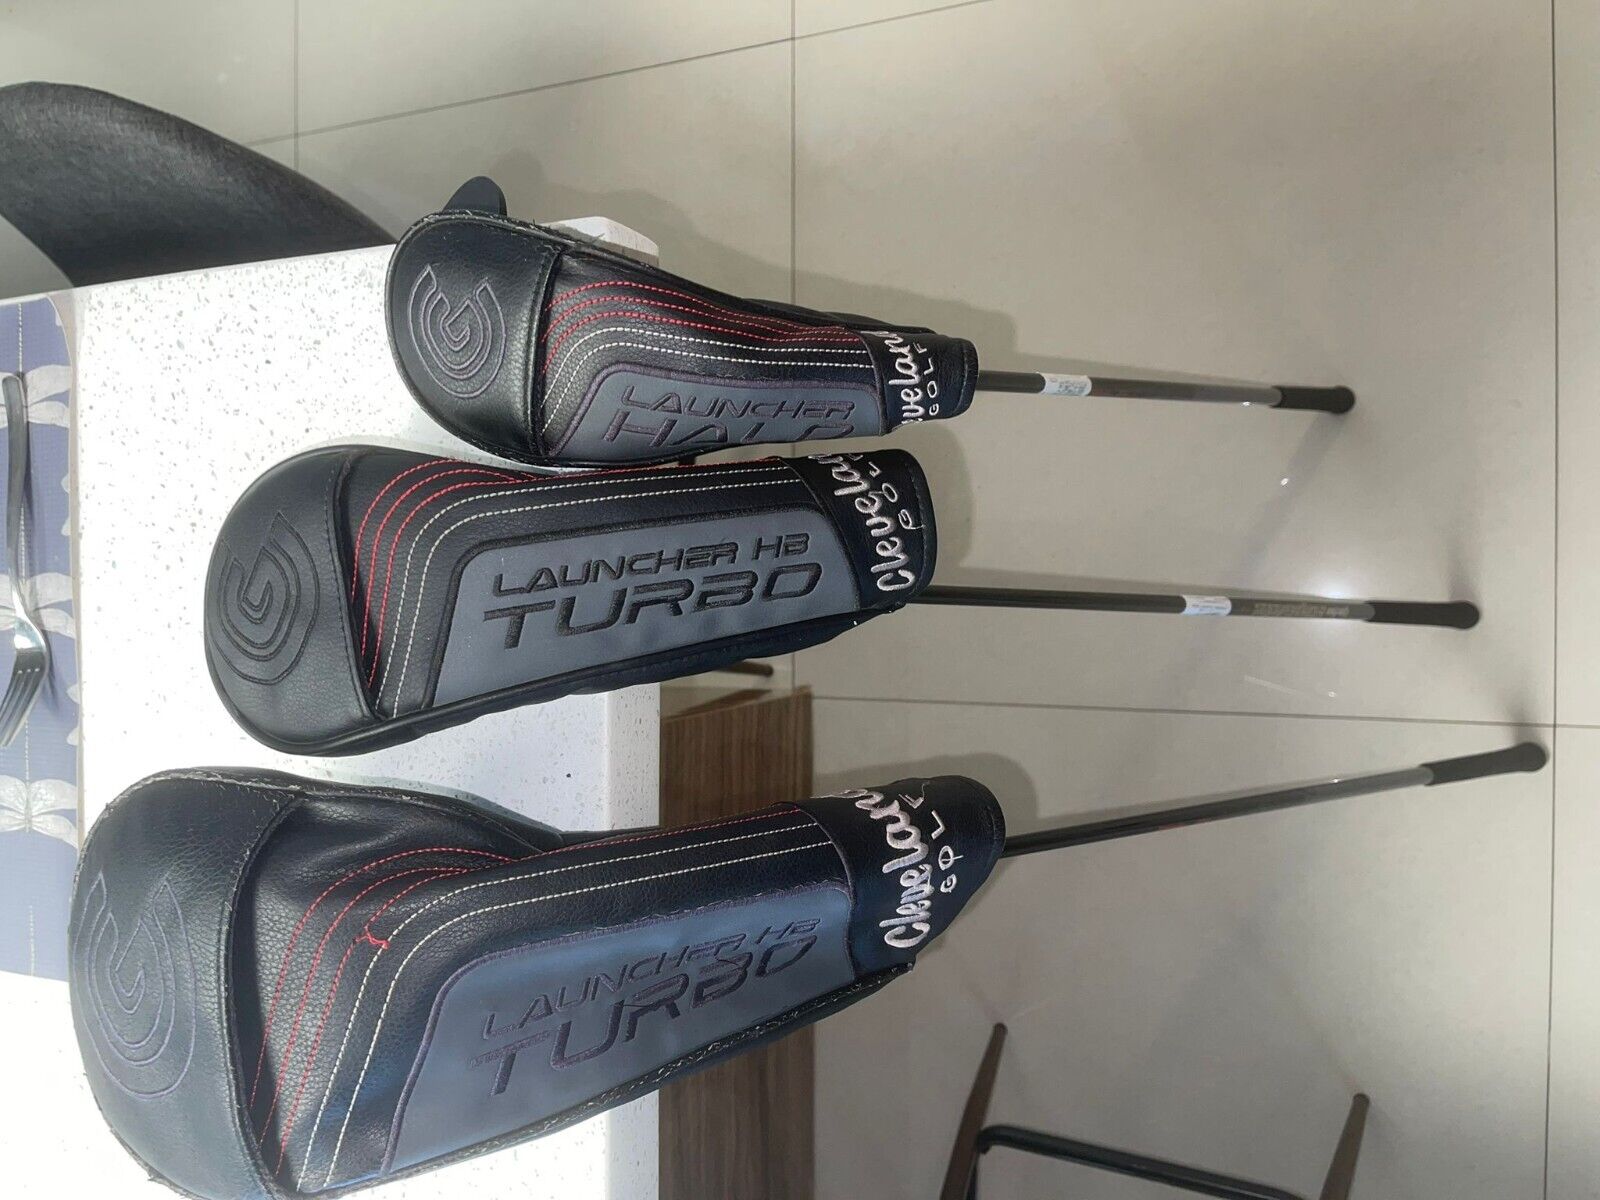 Sets of Driver Cleveland Launcher HB Turbo, clubs (5 to D) 3 wood and 4 hybrid